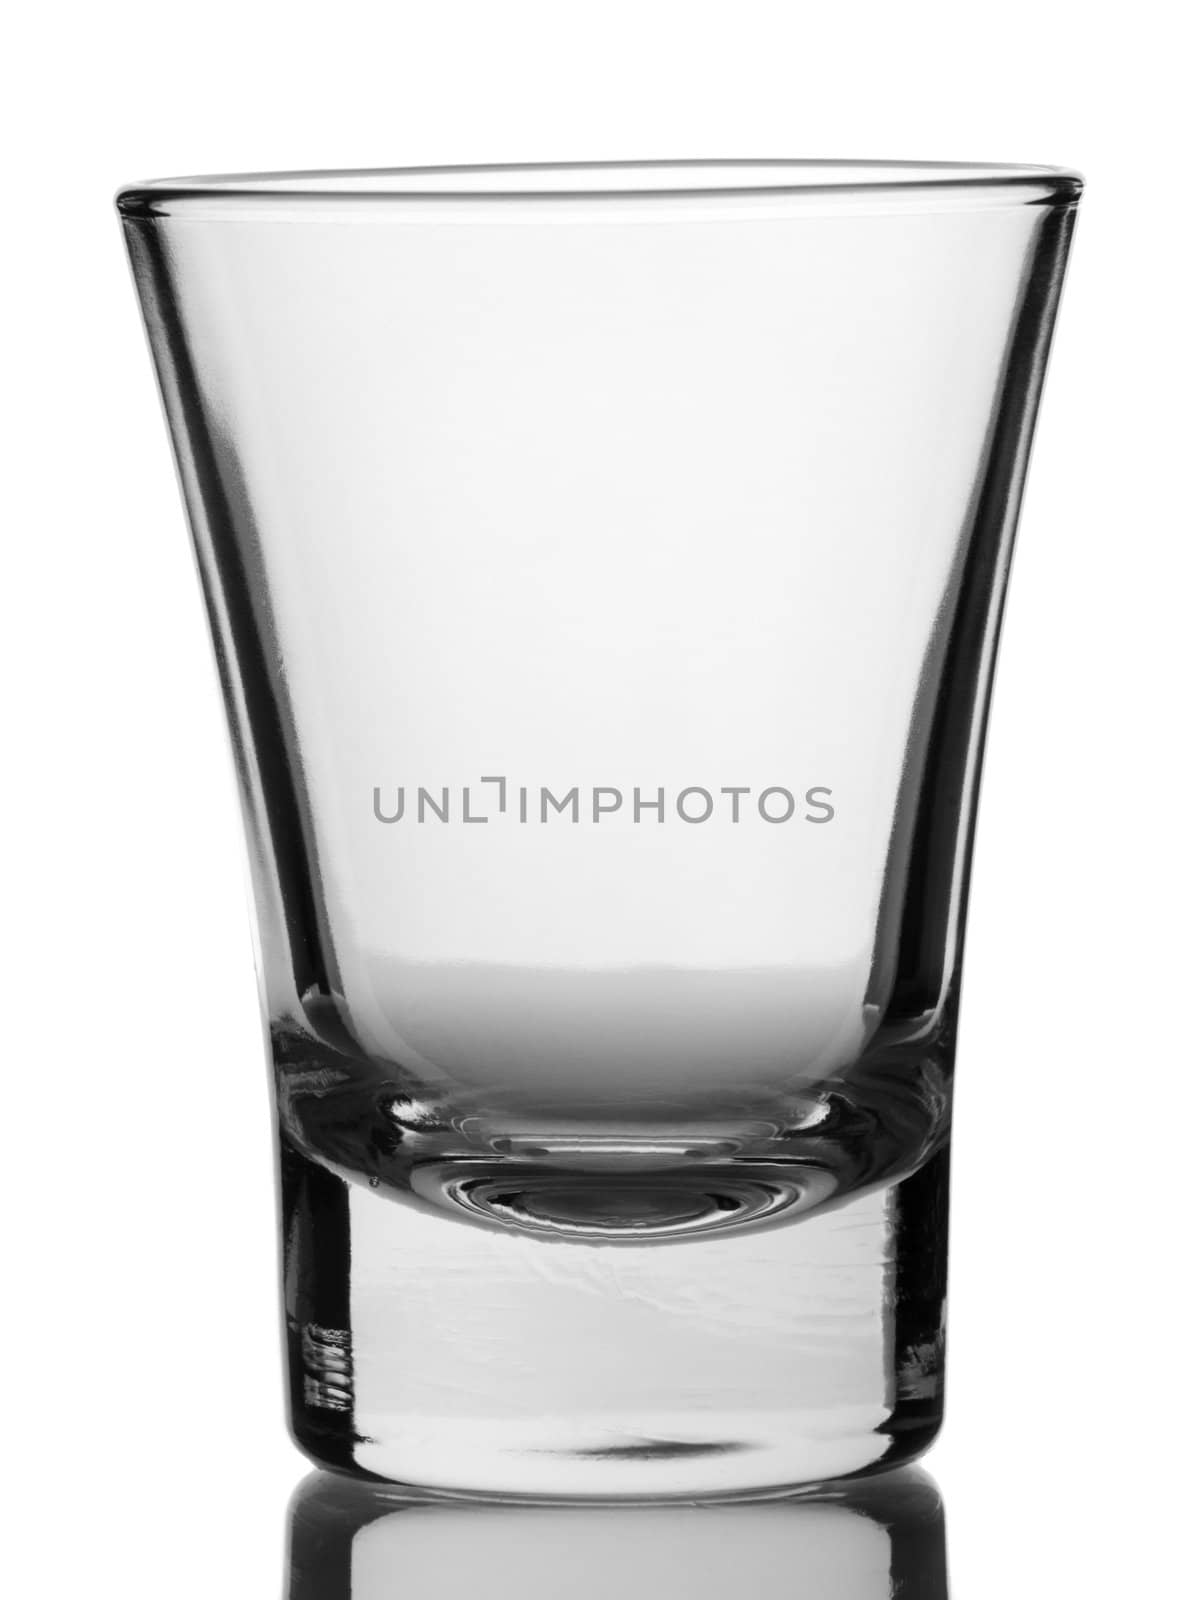 An empty shot glass on white background.